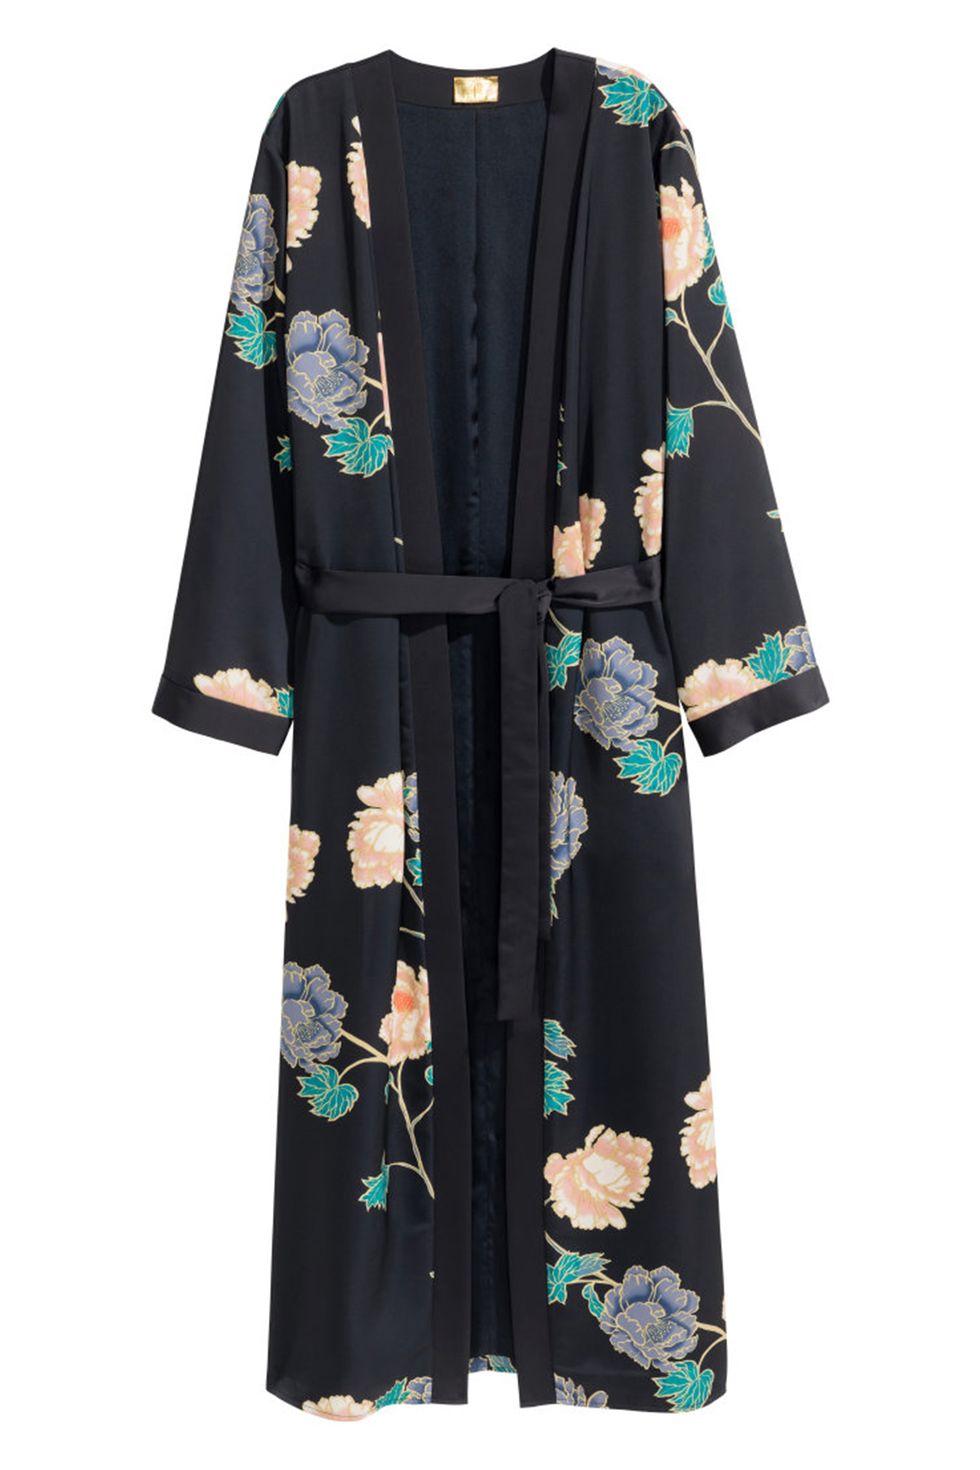 <p>
H&amp;M Patterned Kimono, $80; <a href="http://www.hm.com/us/product/62990?article=62990-A&amp;cm_vc=SEARCH">hm.com</a></p><p><span class="redactor-invisible-space" data-verified="redactor" data-redactor-tag="span" data-redactor-class="redactor-invisible-space"></span></p>